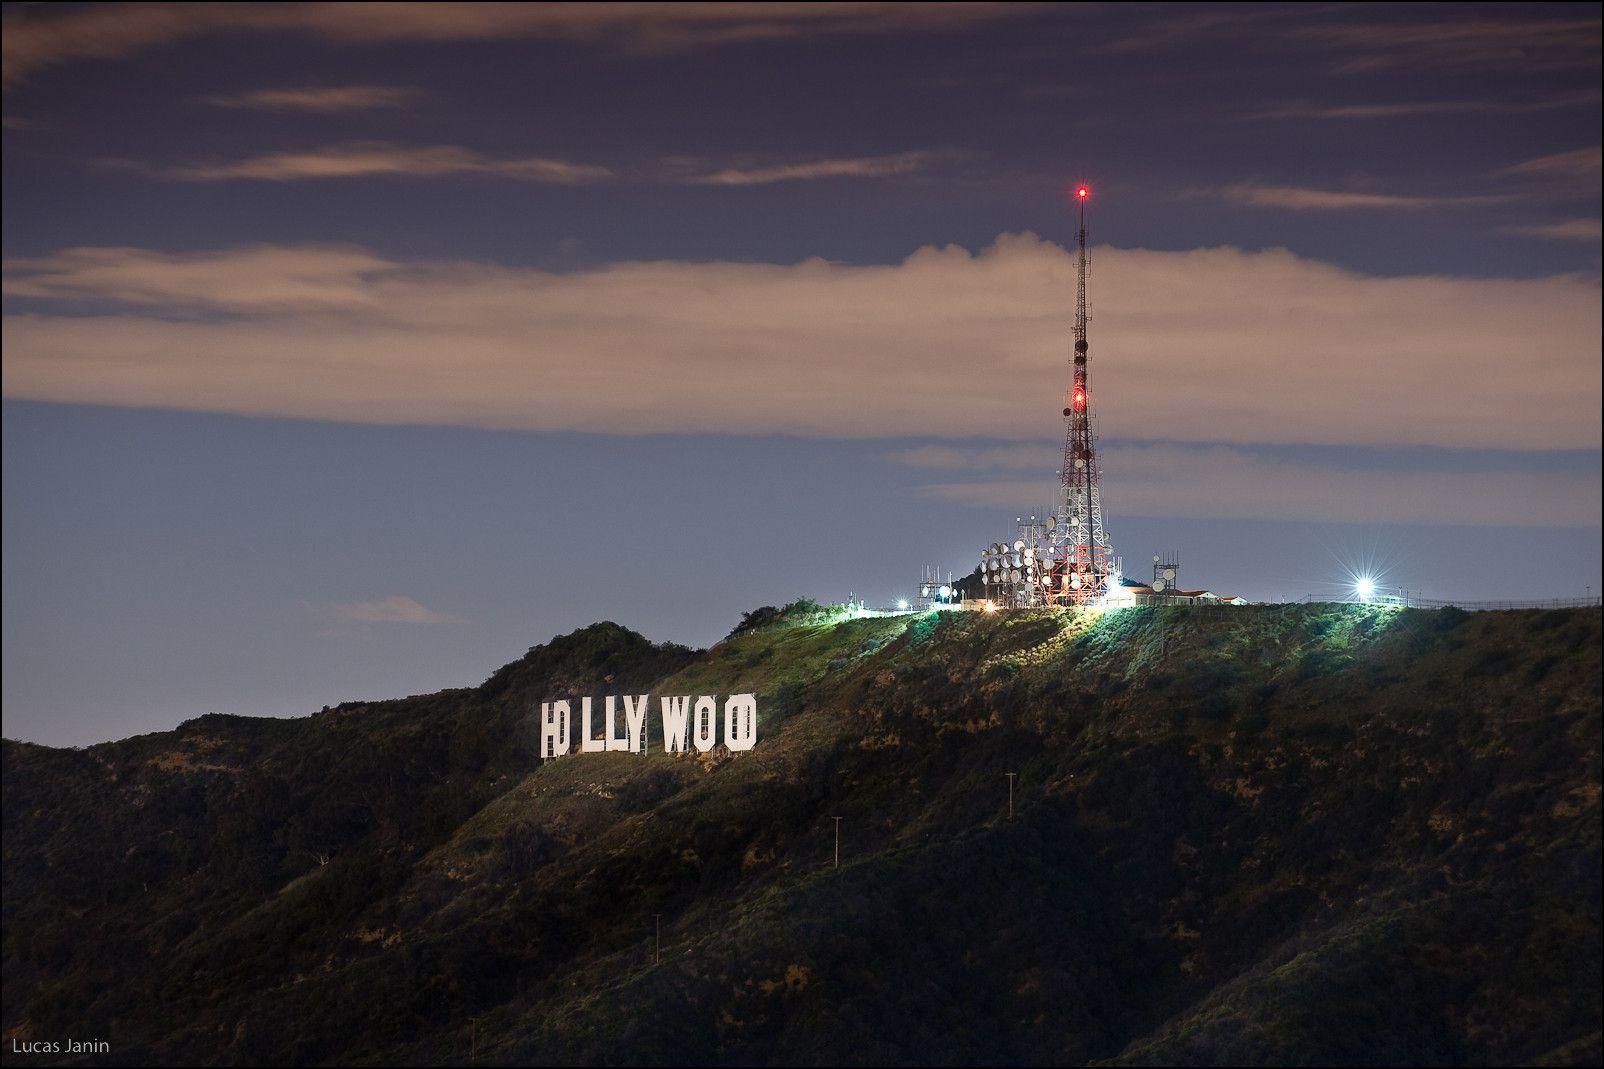 Hollywood Sign Wallpapers - Wallpaper Cave